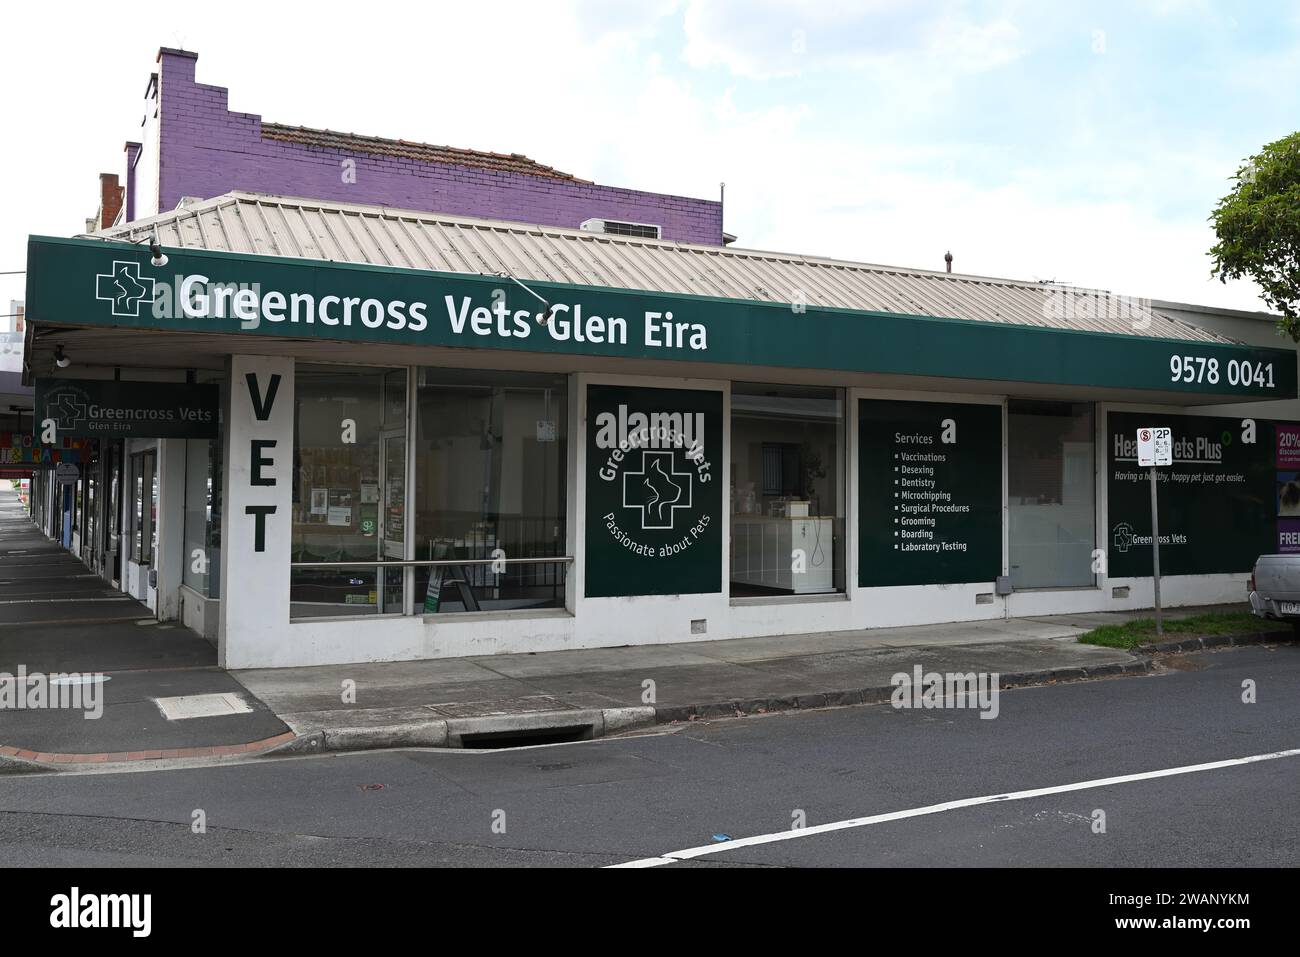 Exterior of Greencross Vets Glen Eira's veterinary clinic on North Rd, with waiting room visible through the window Stock Photo